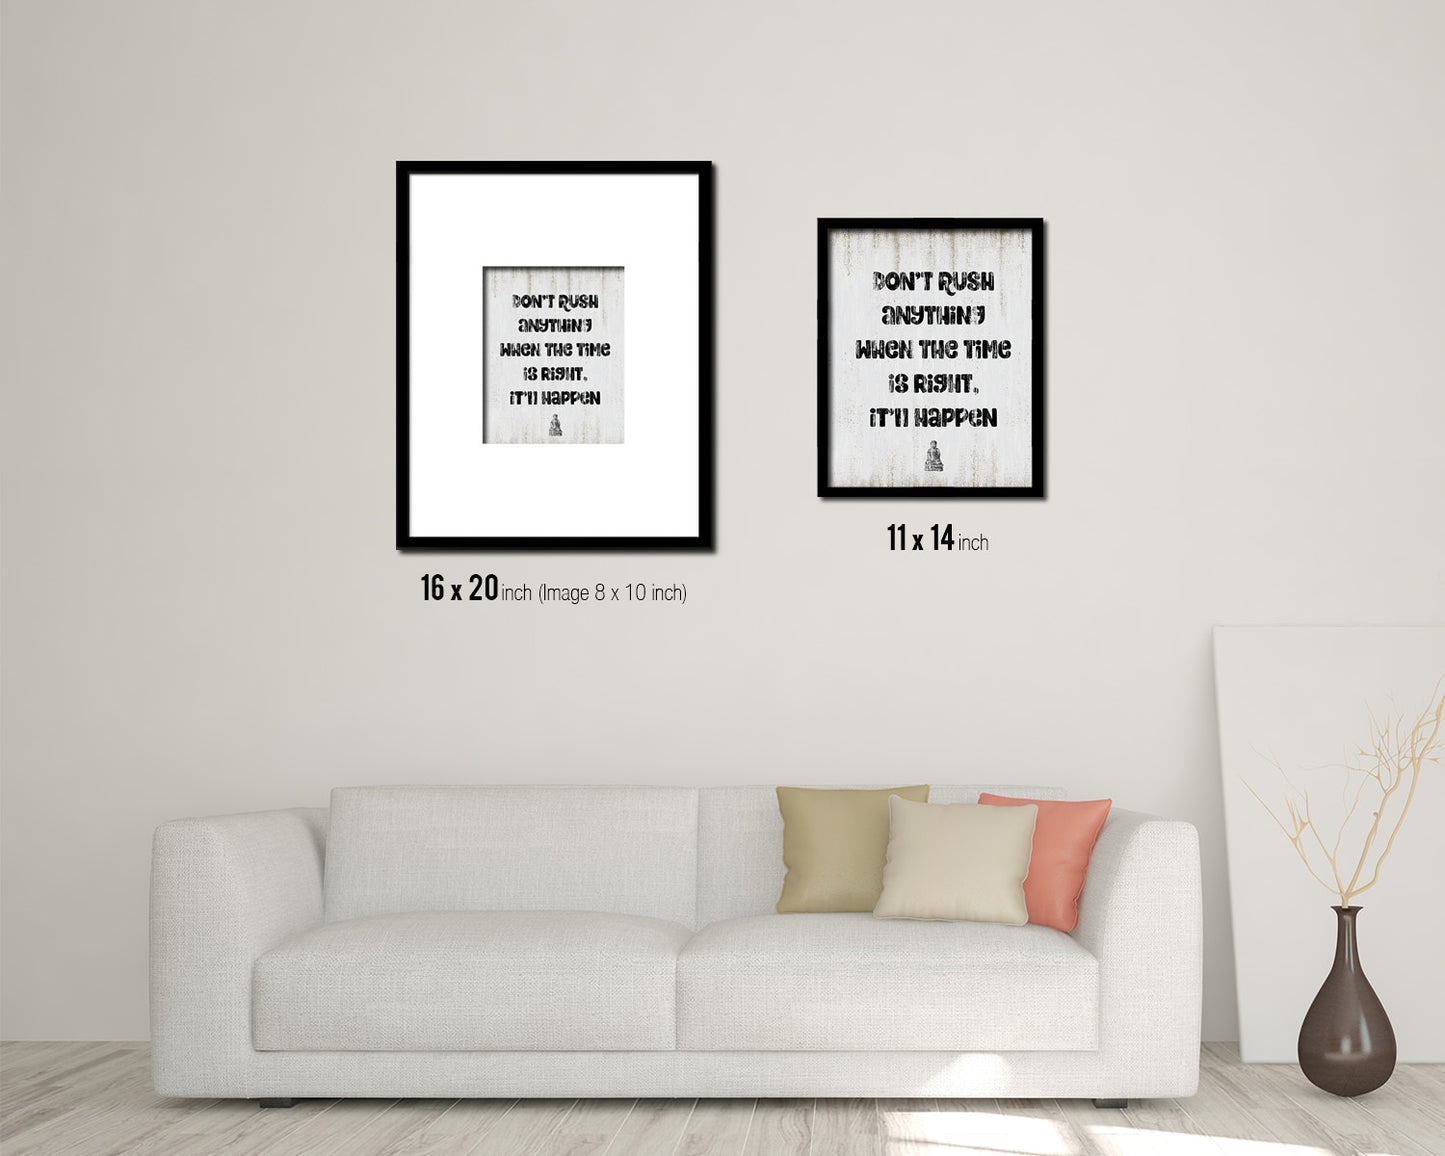 Don't rush anything when the time is right Quote Wood Framed Print Wall Decor Art